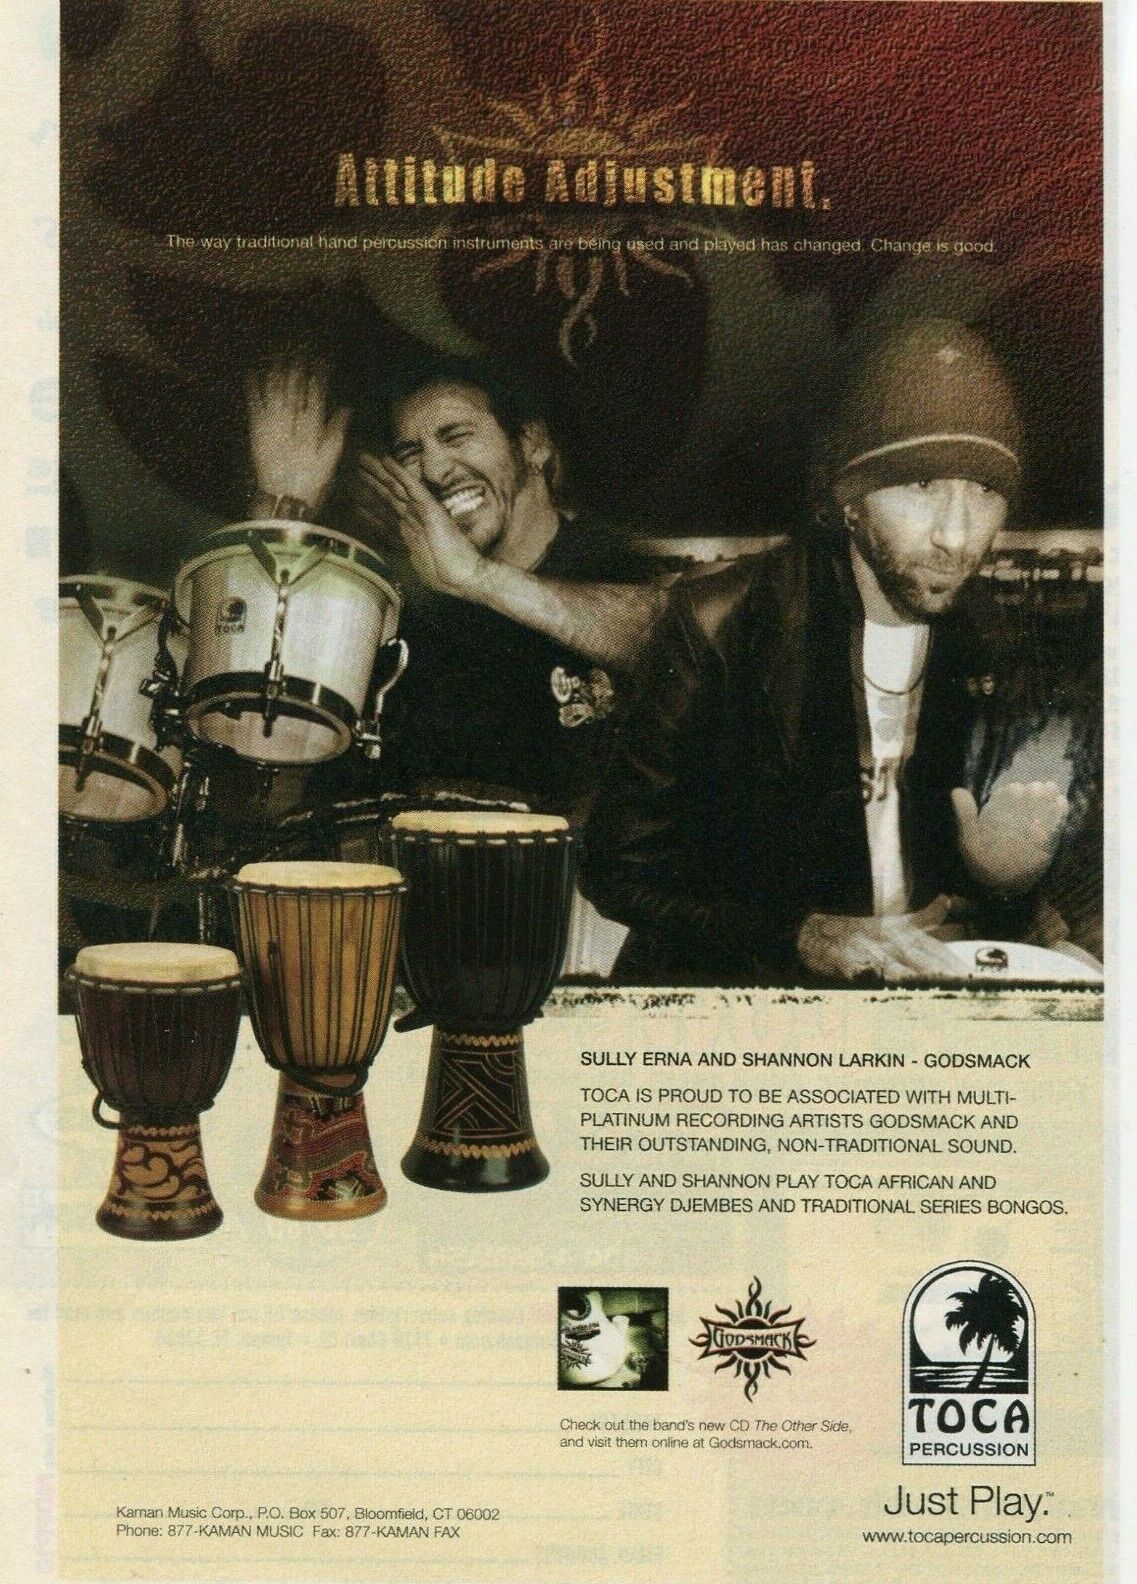 2004 small Print Ad Toca African & Synergy Djembes w Sully Erna, Shannon Larkin